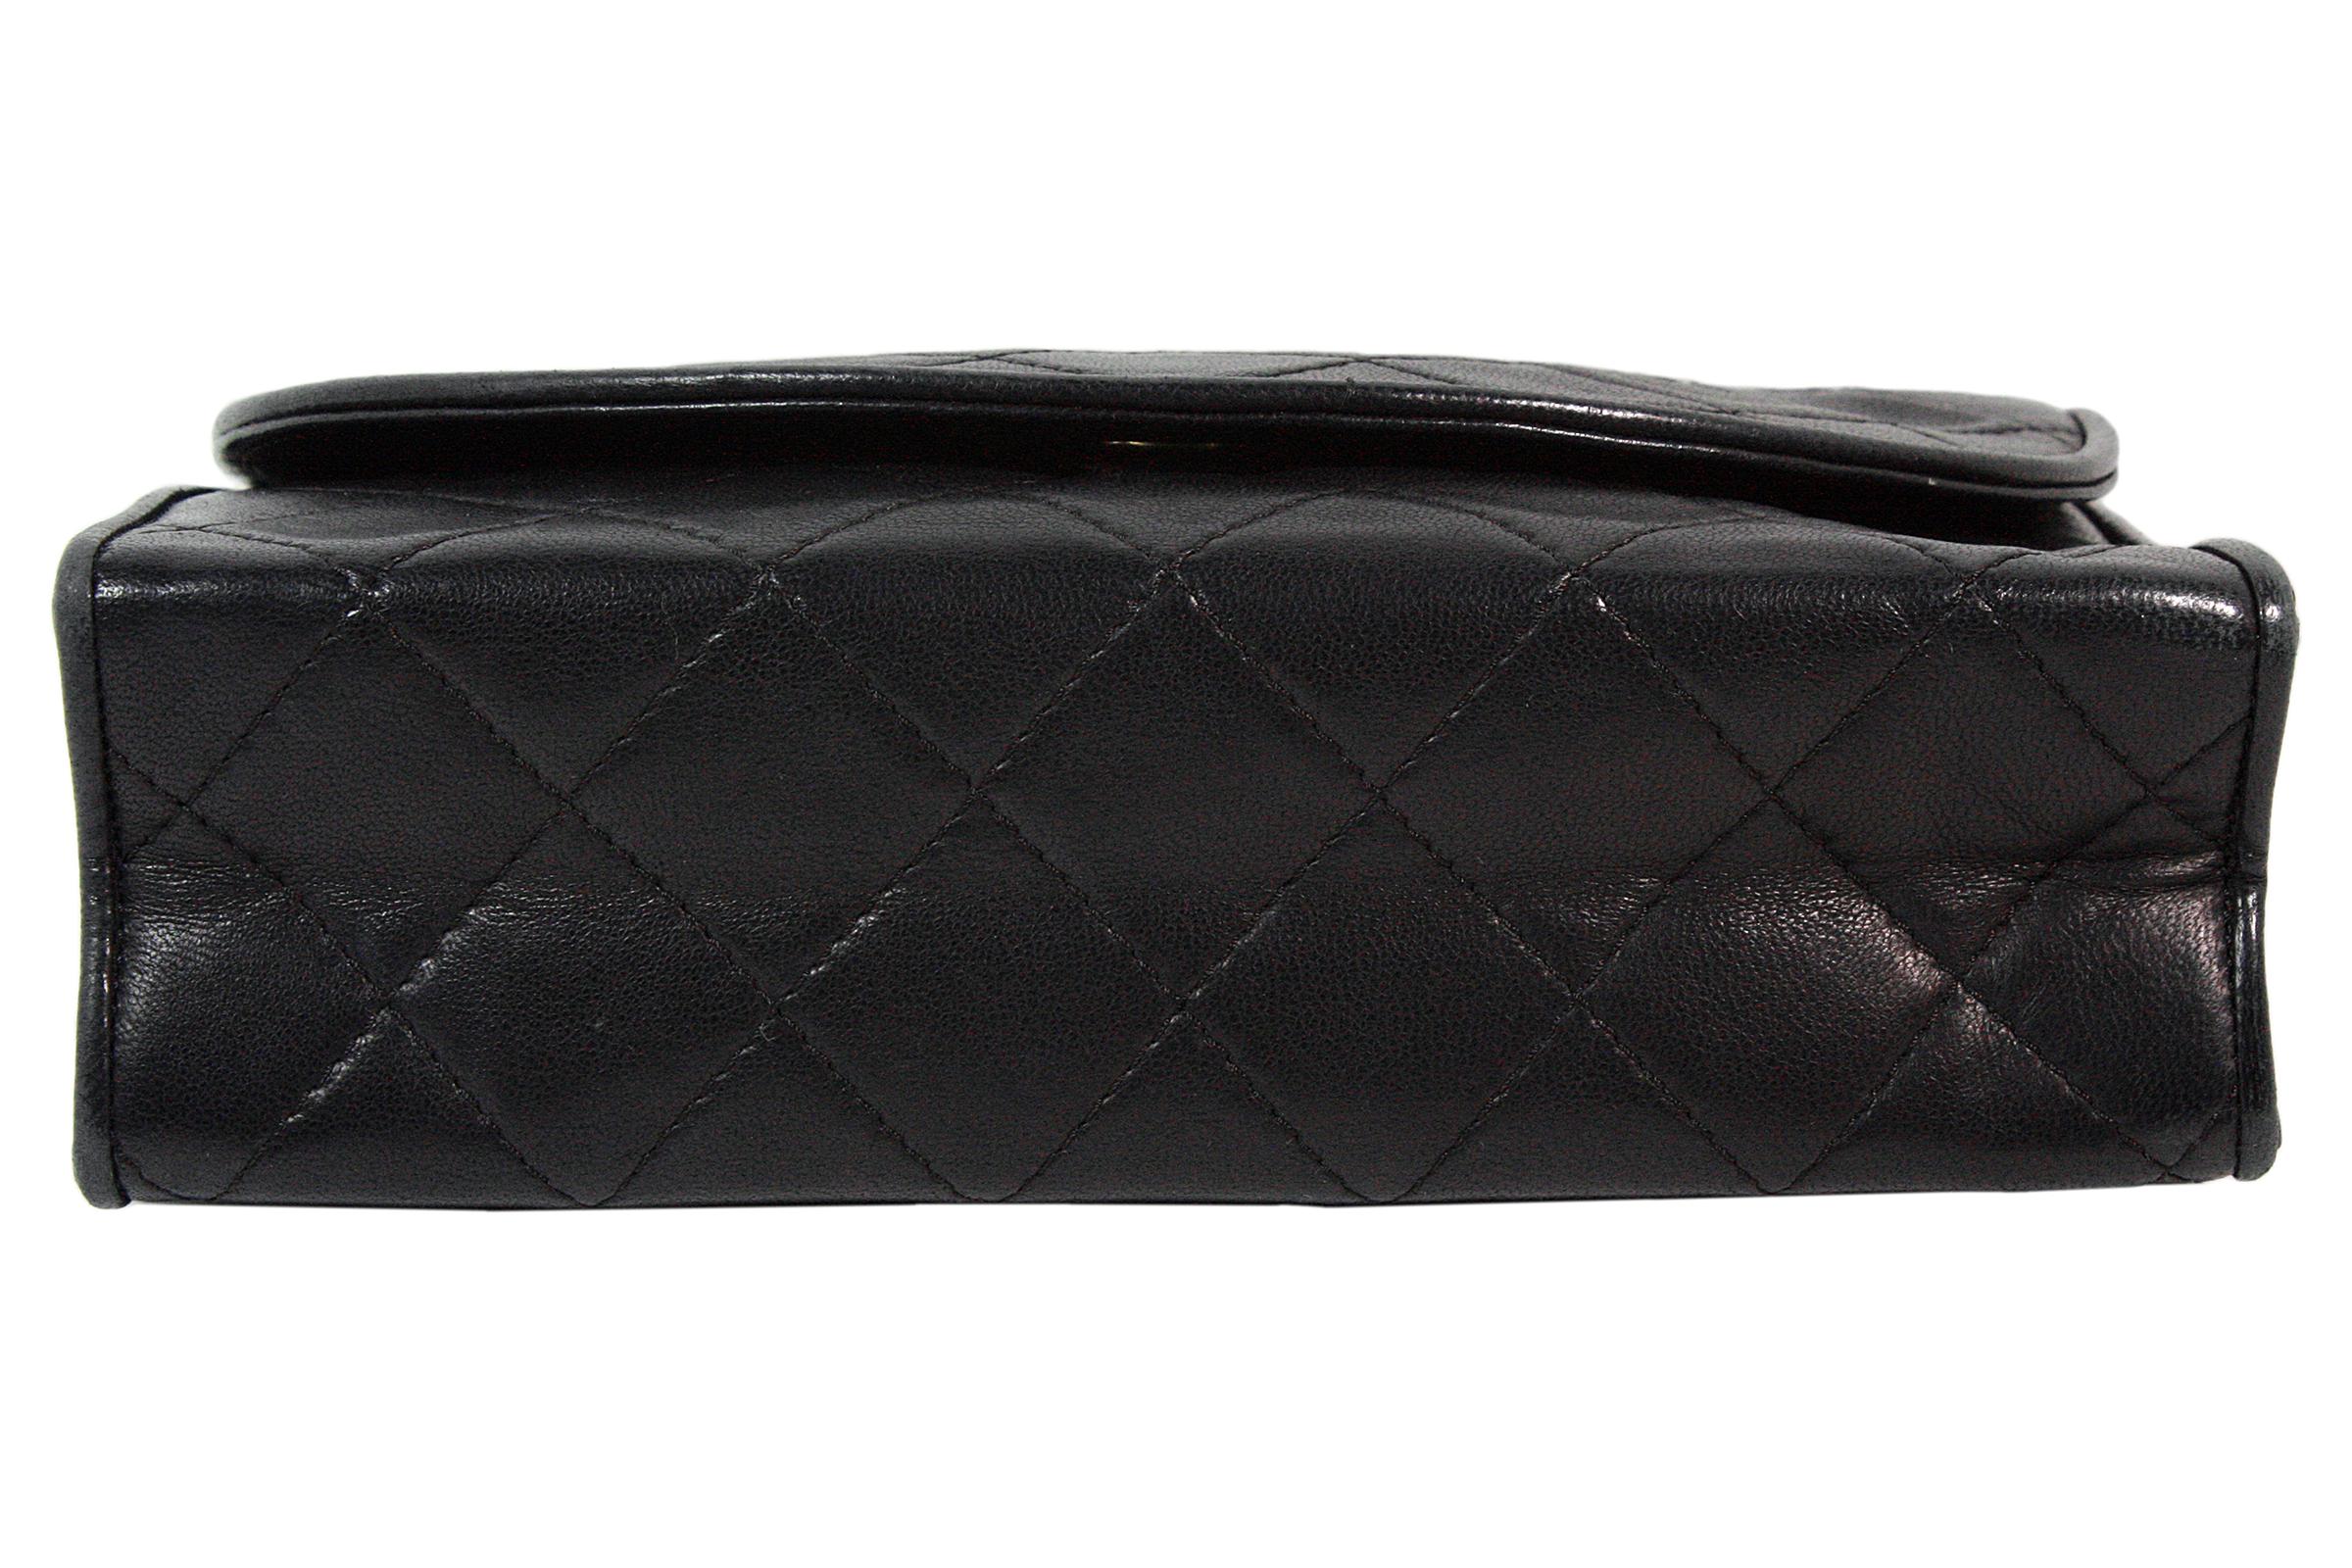 Chanel Black Leather Quilted Crossbody Bag with Tassle In Good Condition For Sale In Los Angeles, CA